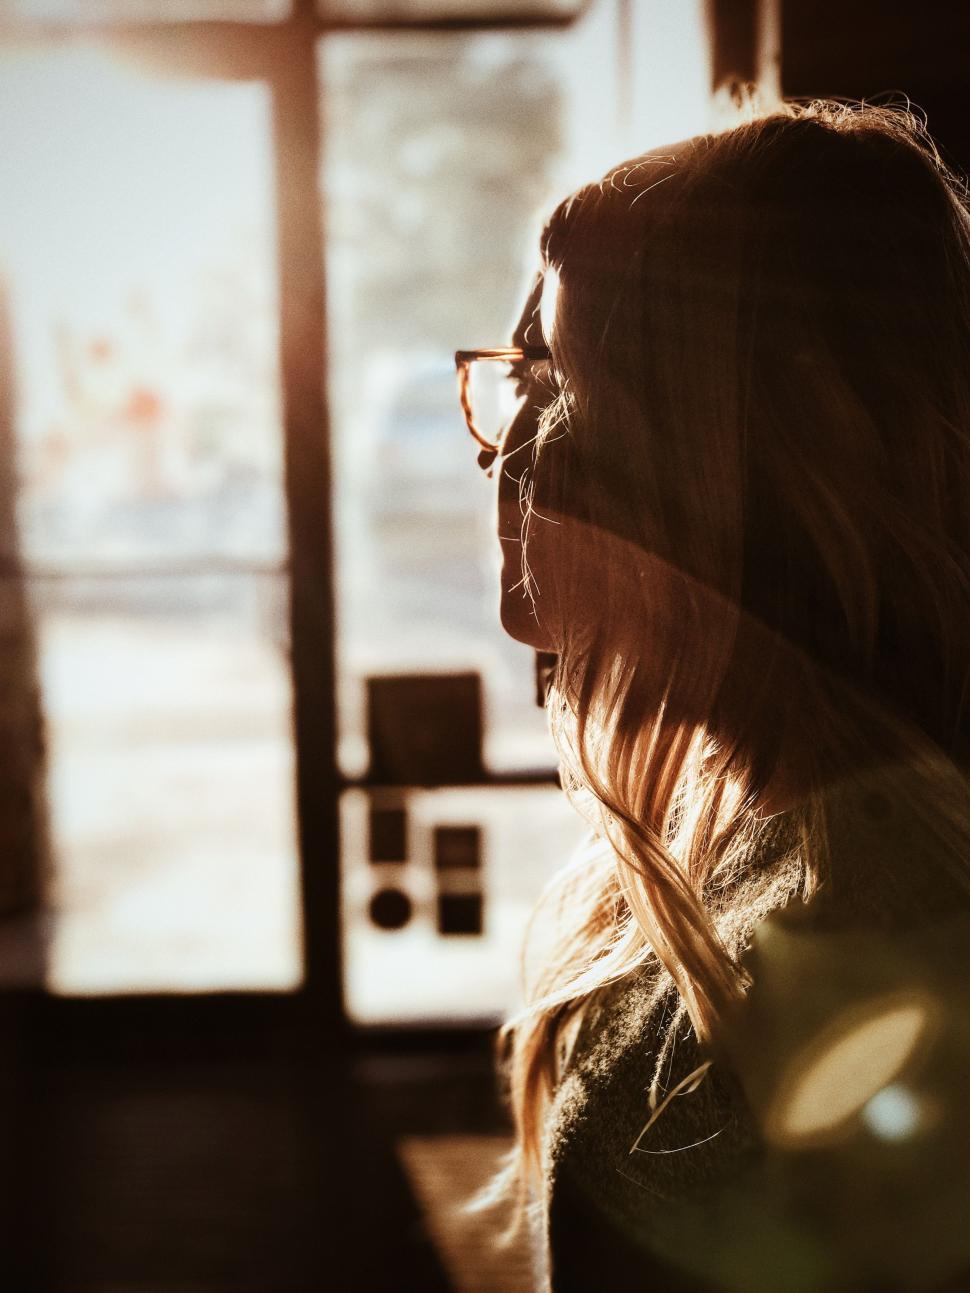 Free Image of Woman Standing in Front of Window 